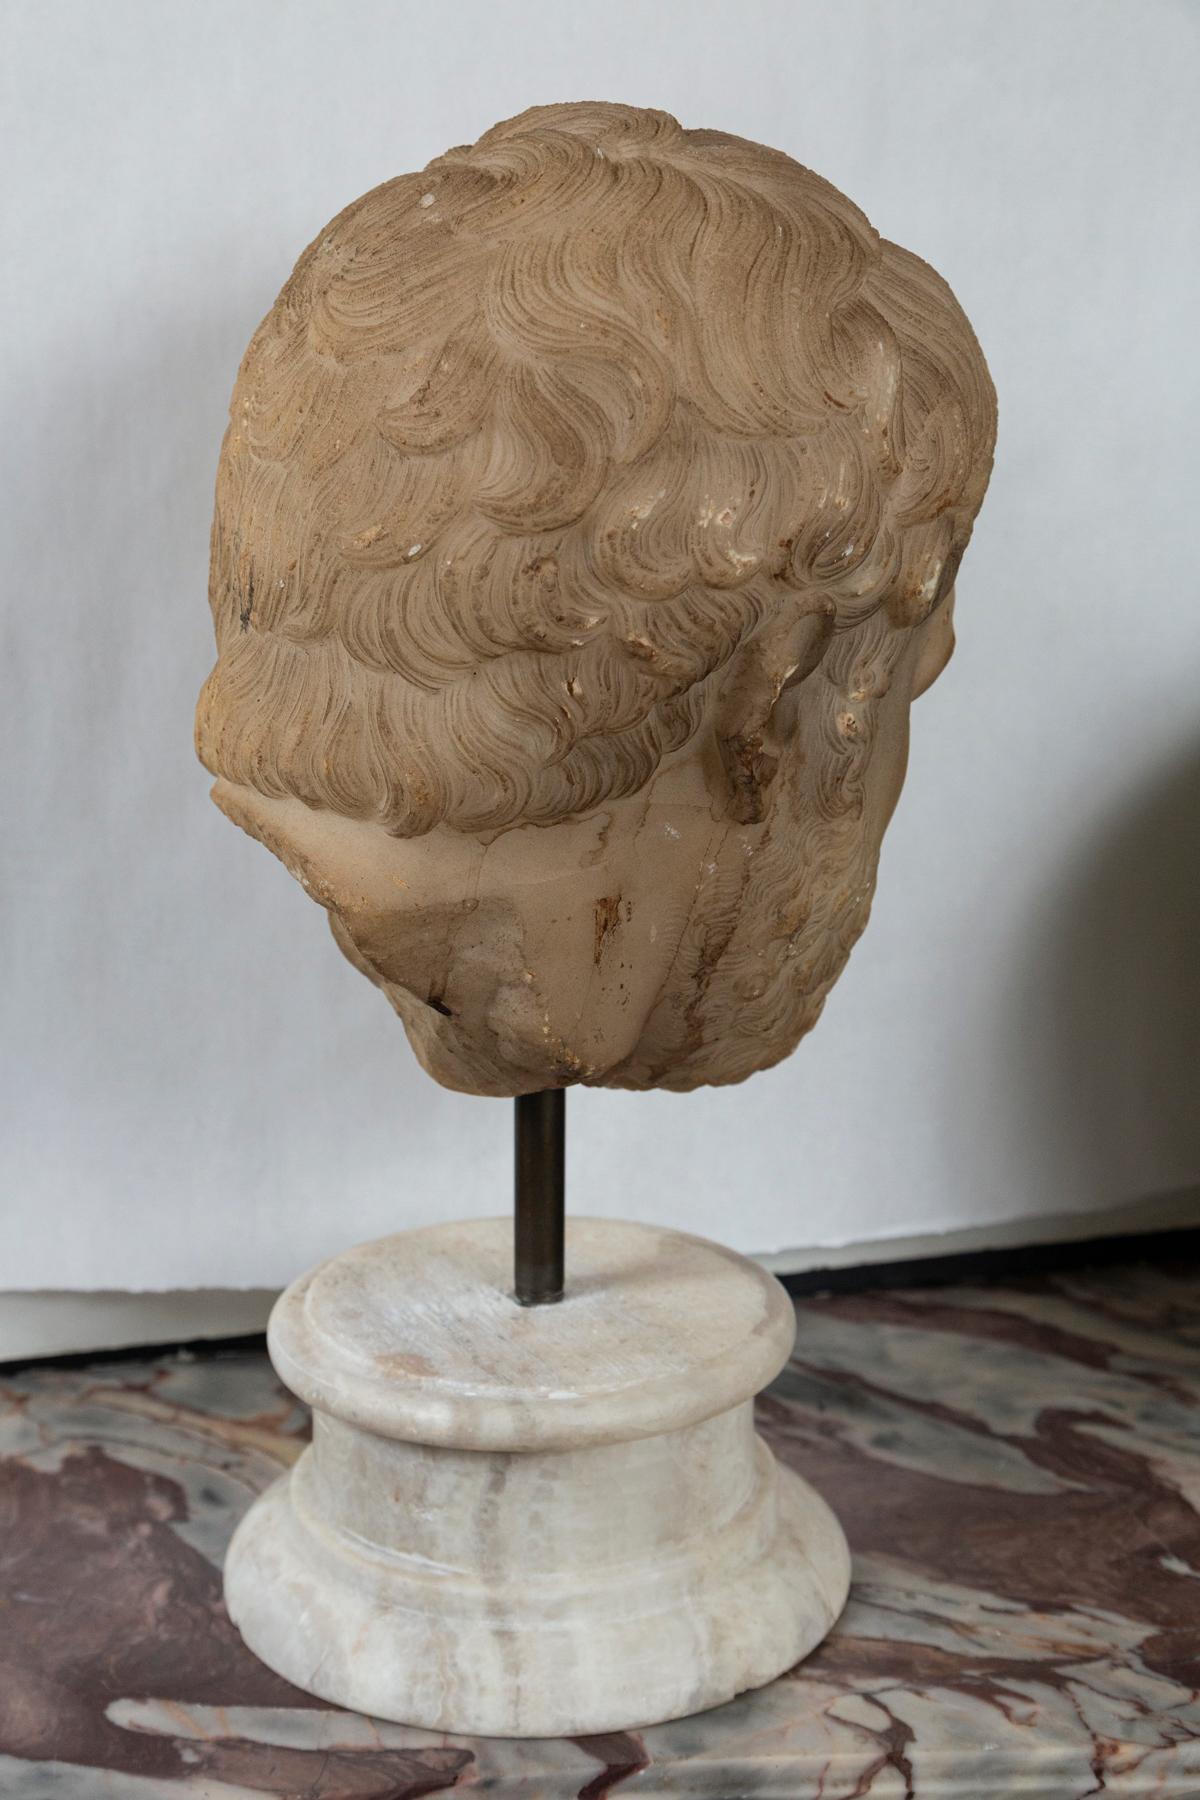 Mid-18th Century Alabaster Bust of a Greek or Roman Male on a Marble  Base